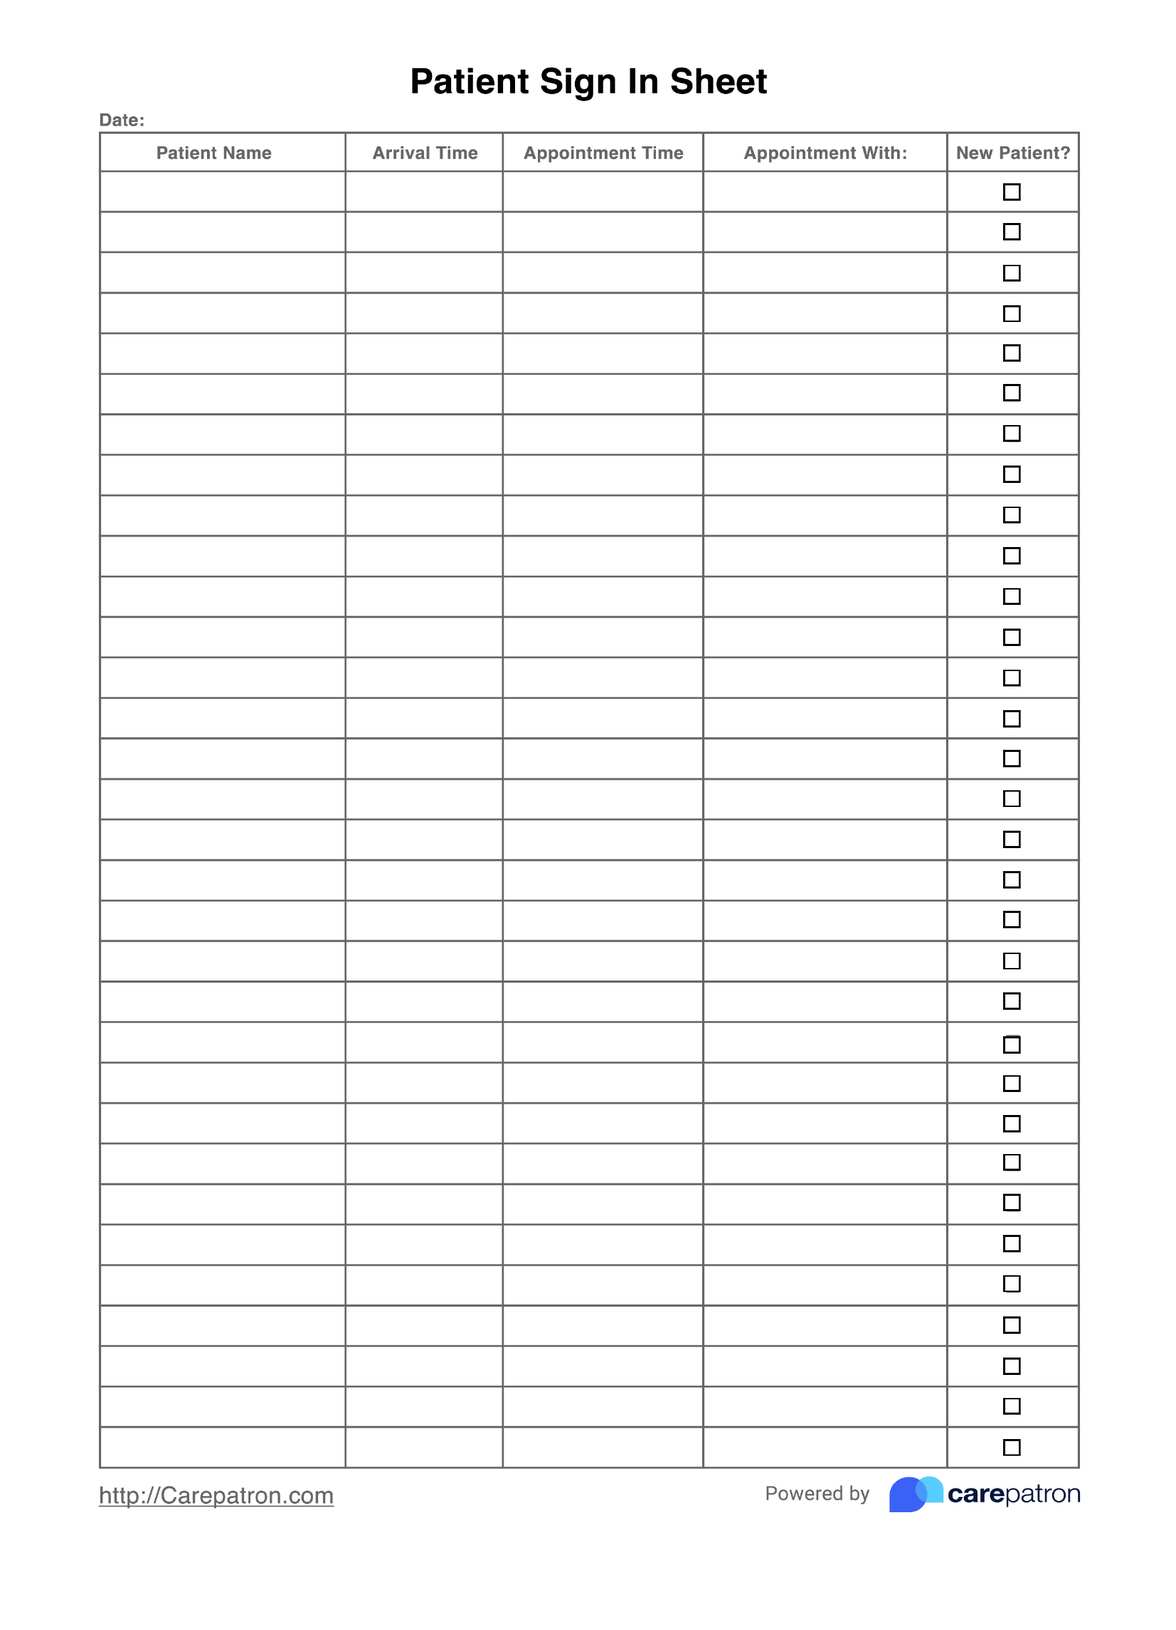 Patient Sign In Sheet PDF Example